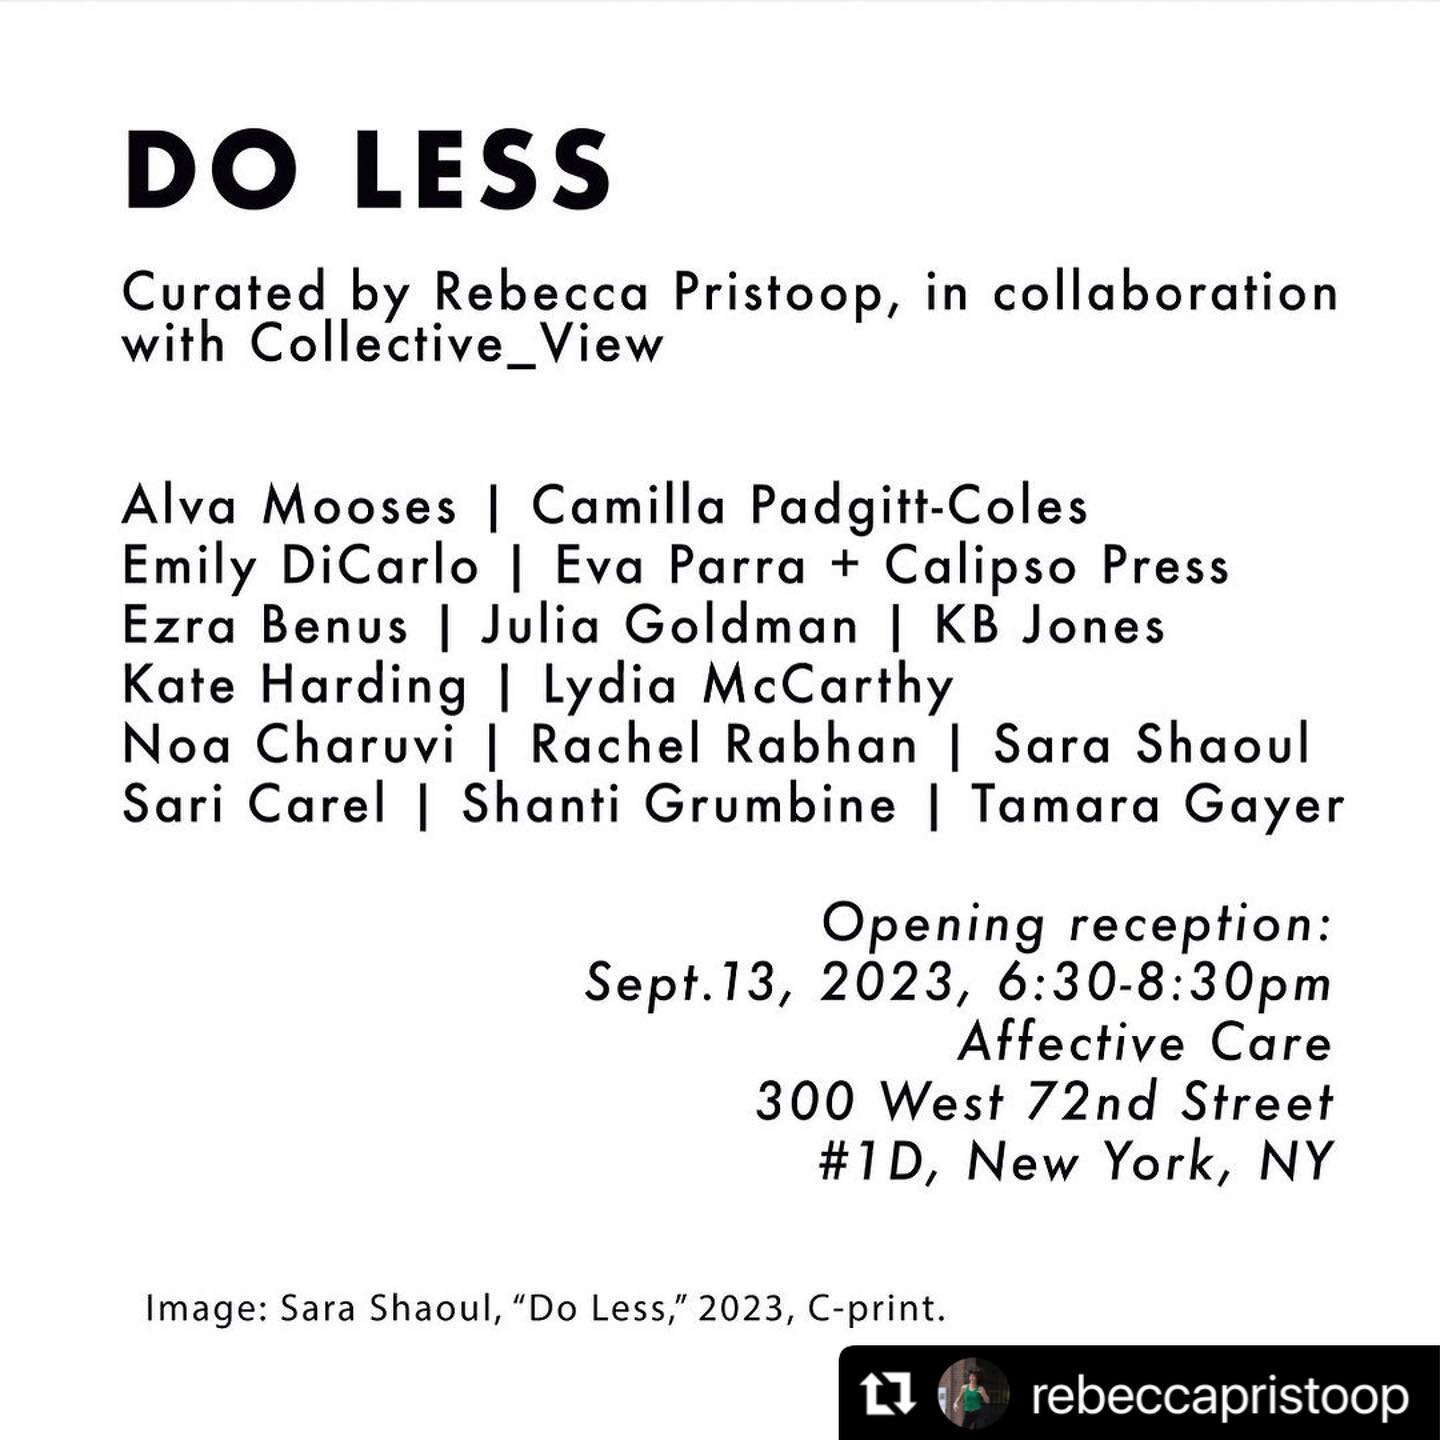 I&rsquo;m very happy to be included in this show and wish I could be there for the opening in NYC next week. I will be there in spirit. Thank you @rebeccapristoop for your thoughtful collaborative brilliance as always. Big hugs to @_collectiveview_ ?